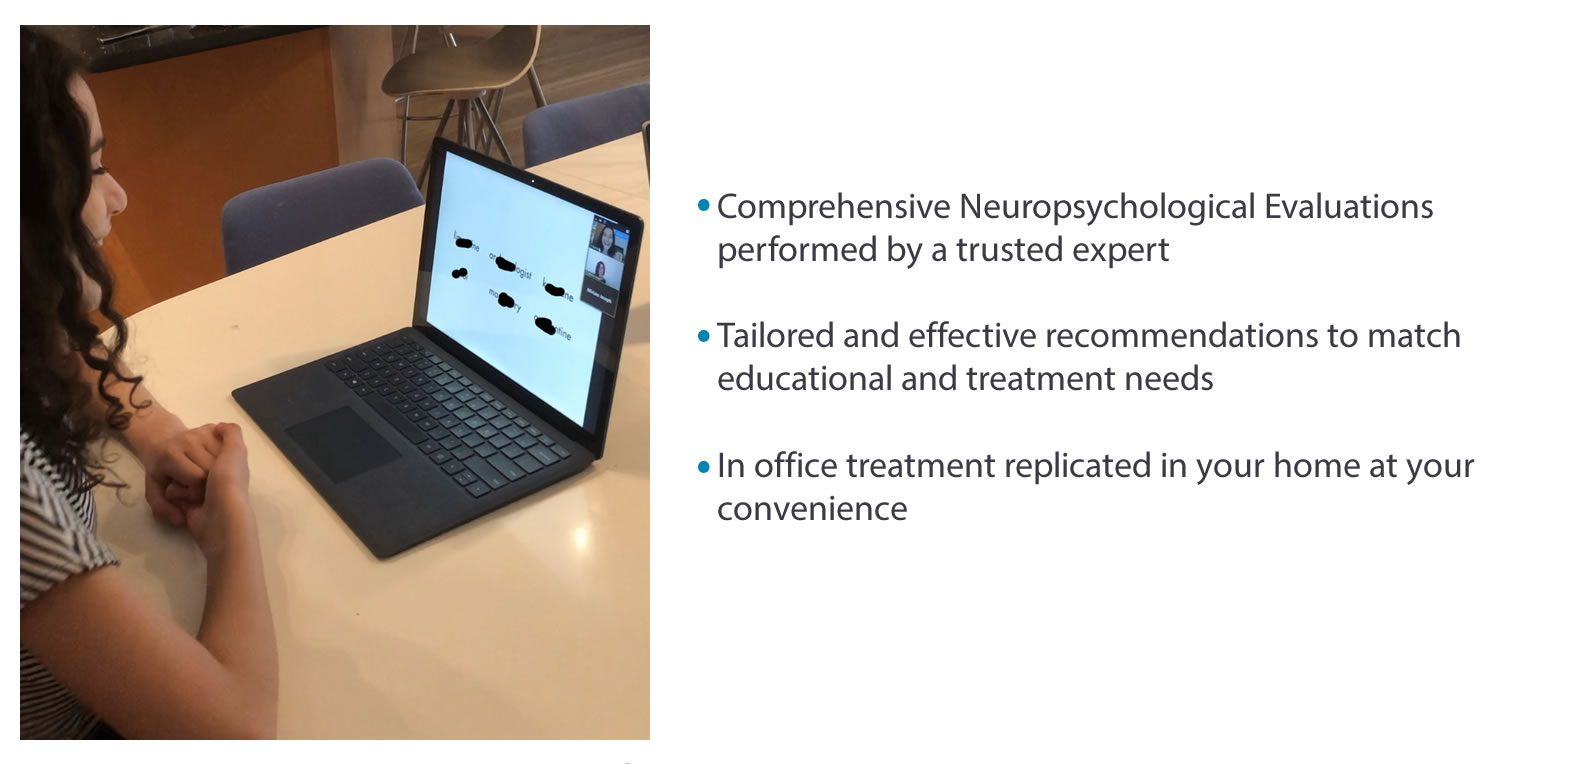 Comprehensive Neuropsychological Evaluation conducted through HIPAA compliant Zoom performed by a highly trained neuropsychologist licensed in New York State.